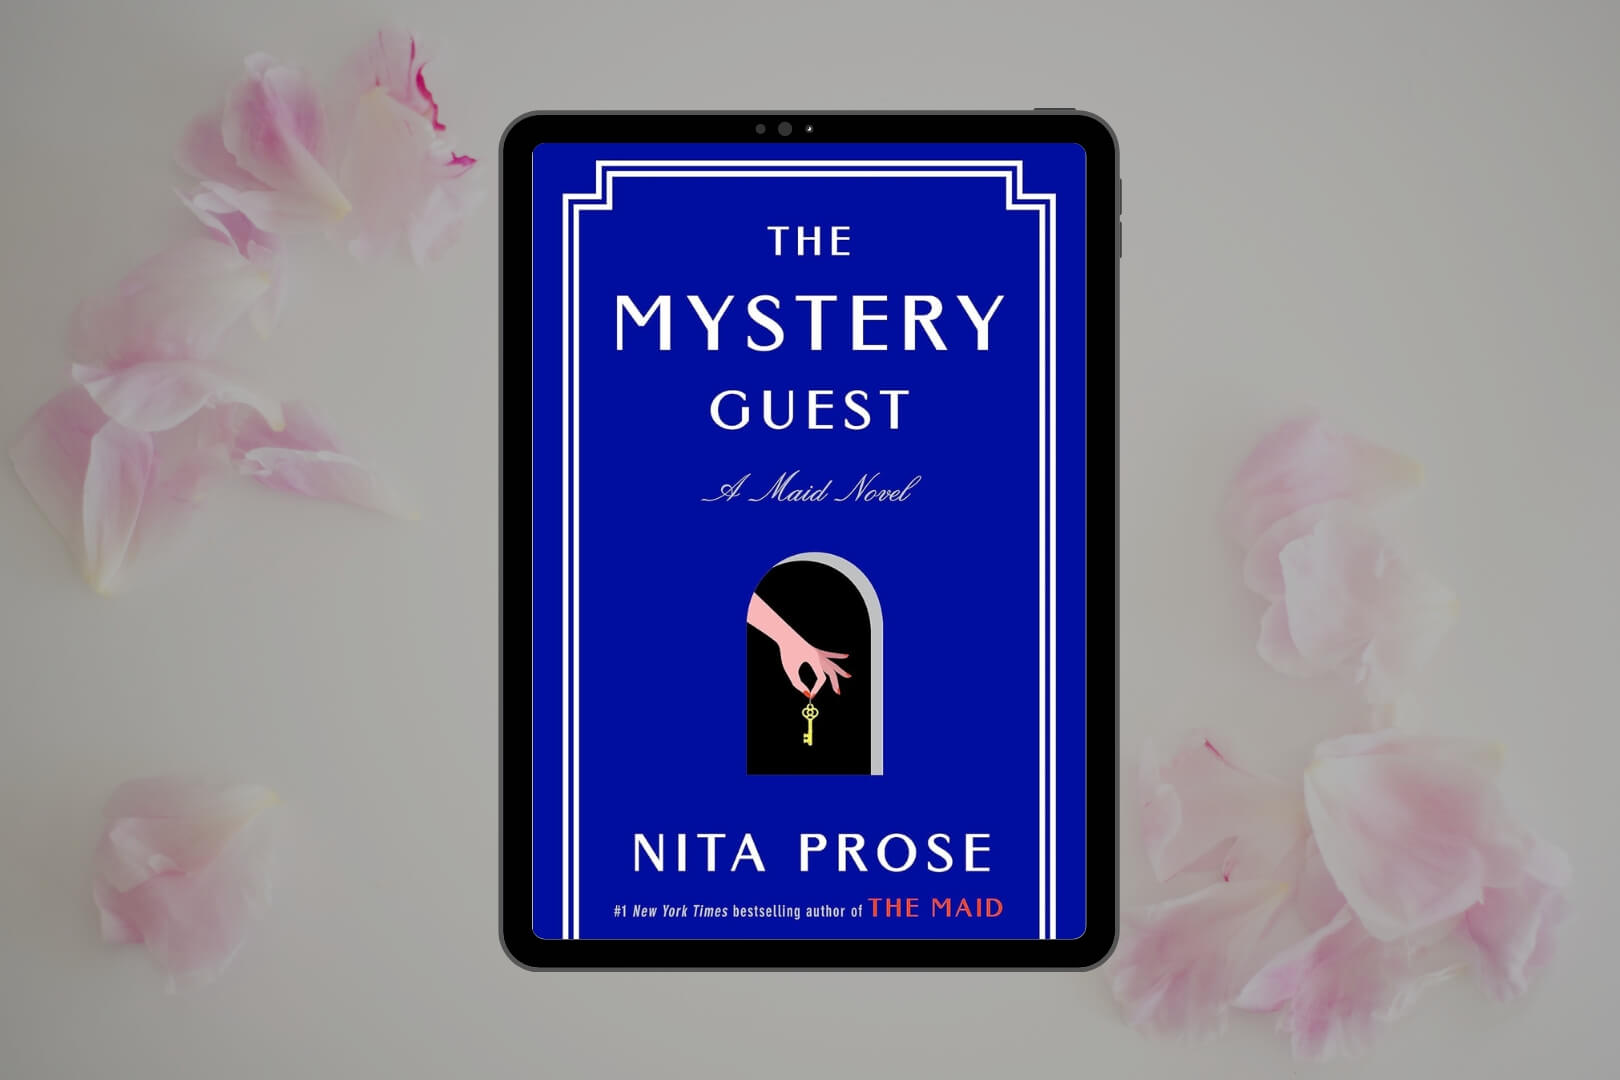 Book Club Questions for The Mystery Guest by Nita Prose